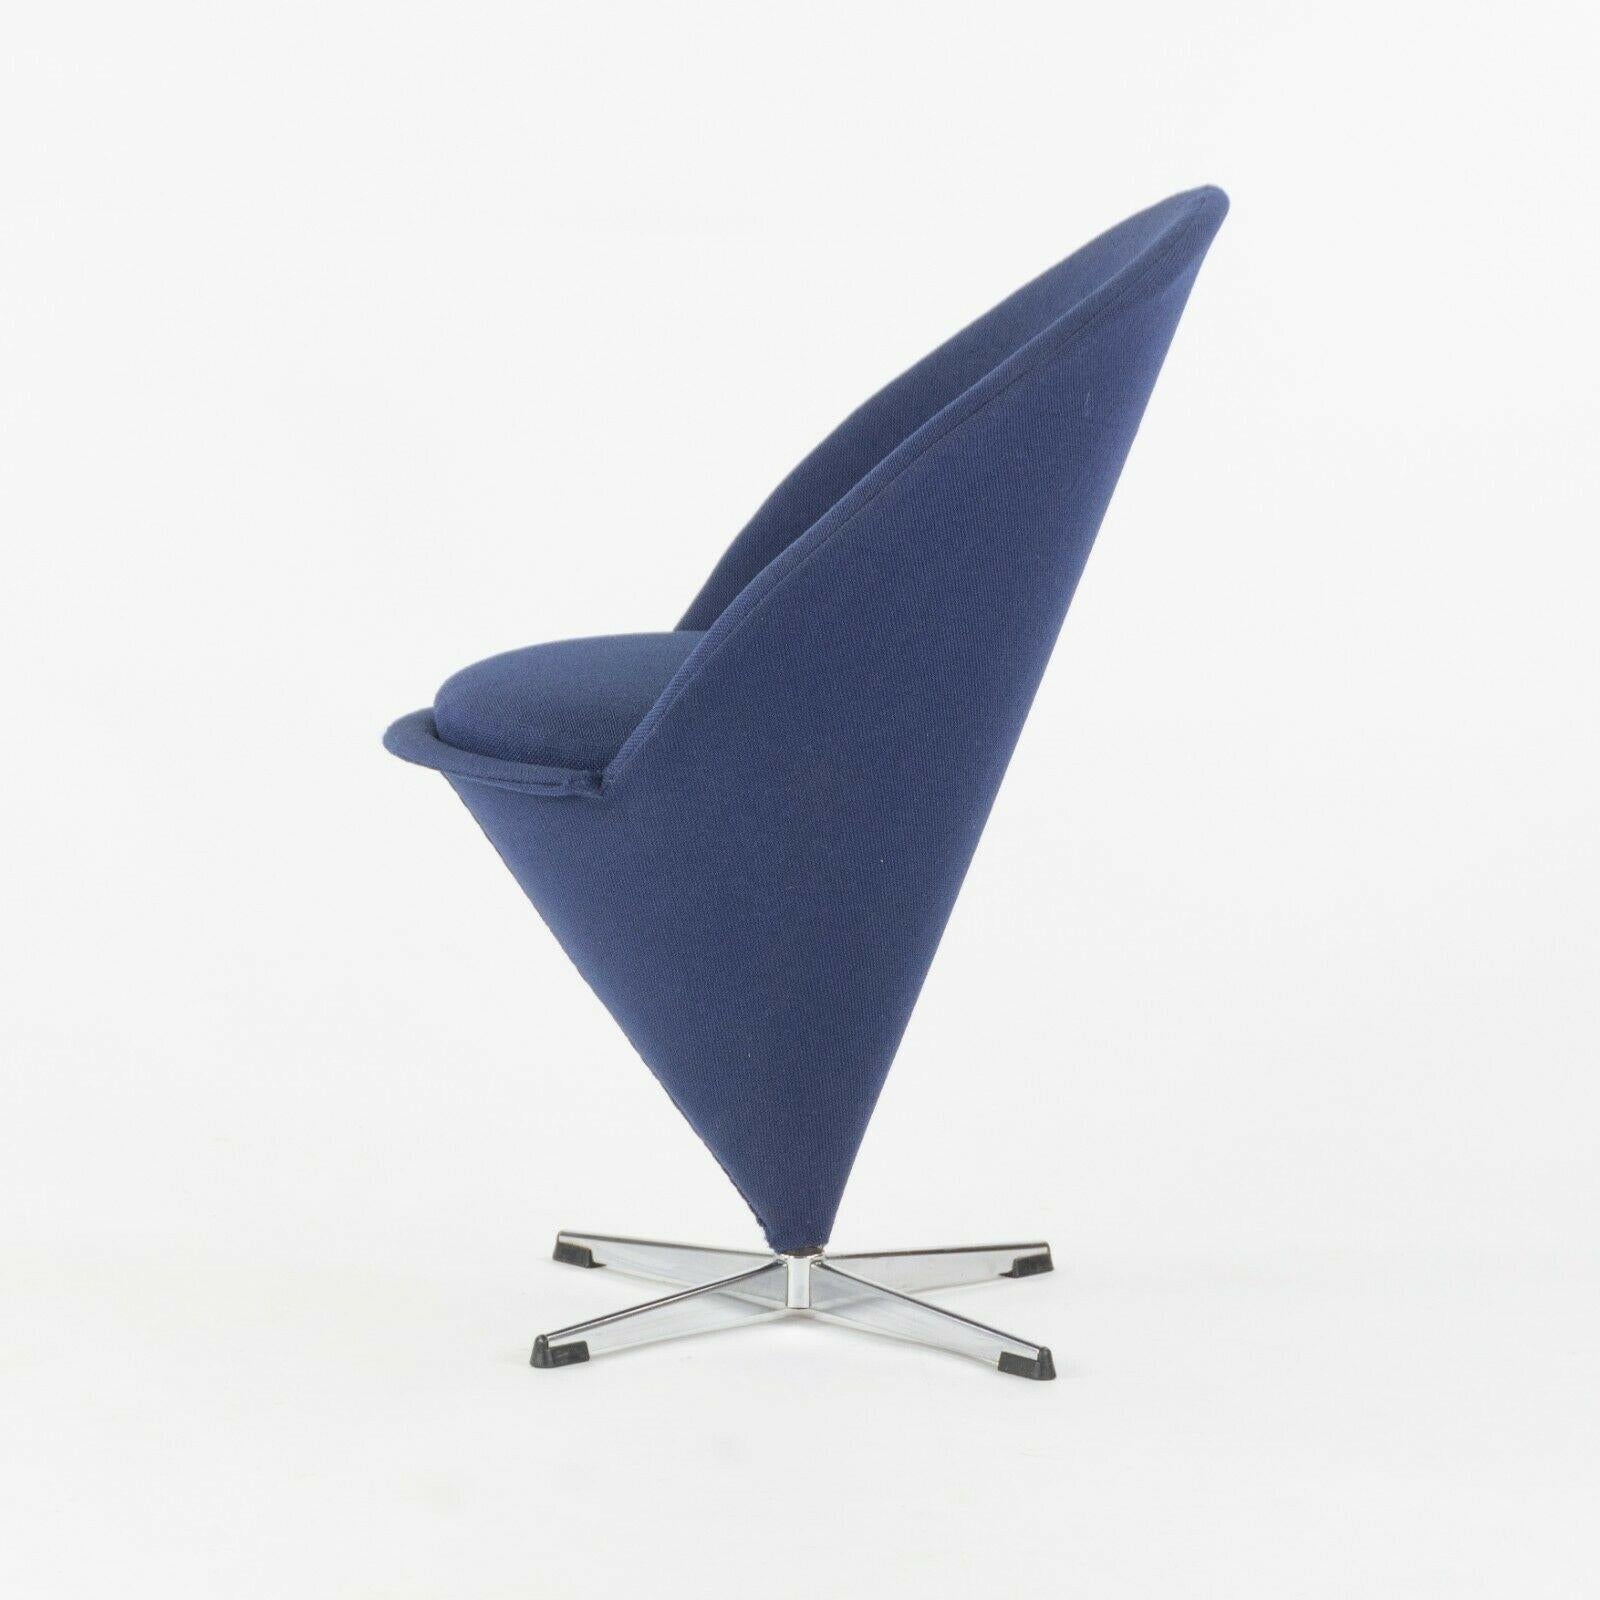 1960s Verner Panton Cone Chair Blue Fabric Made in Denmark for Plus-Linje Vitra 1